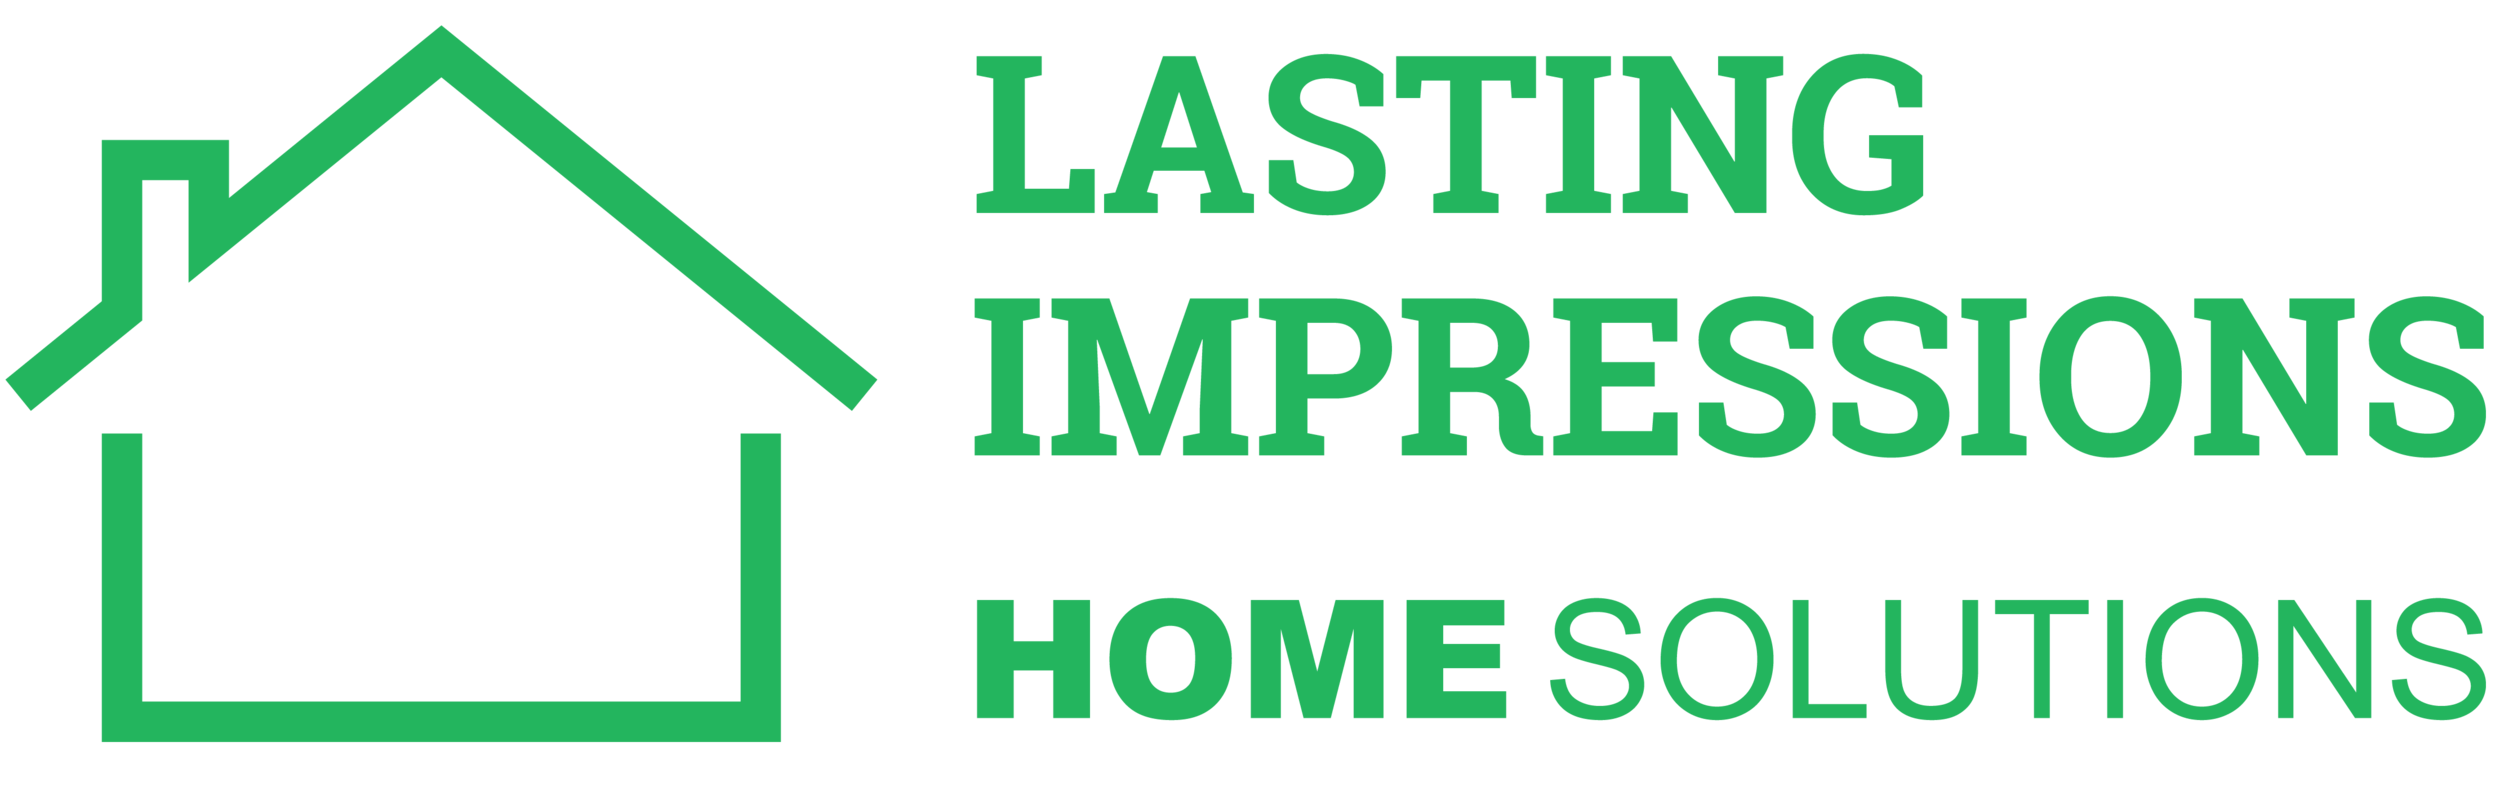 Lasting Impressions Home Solutions